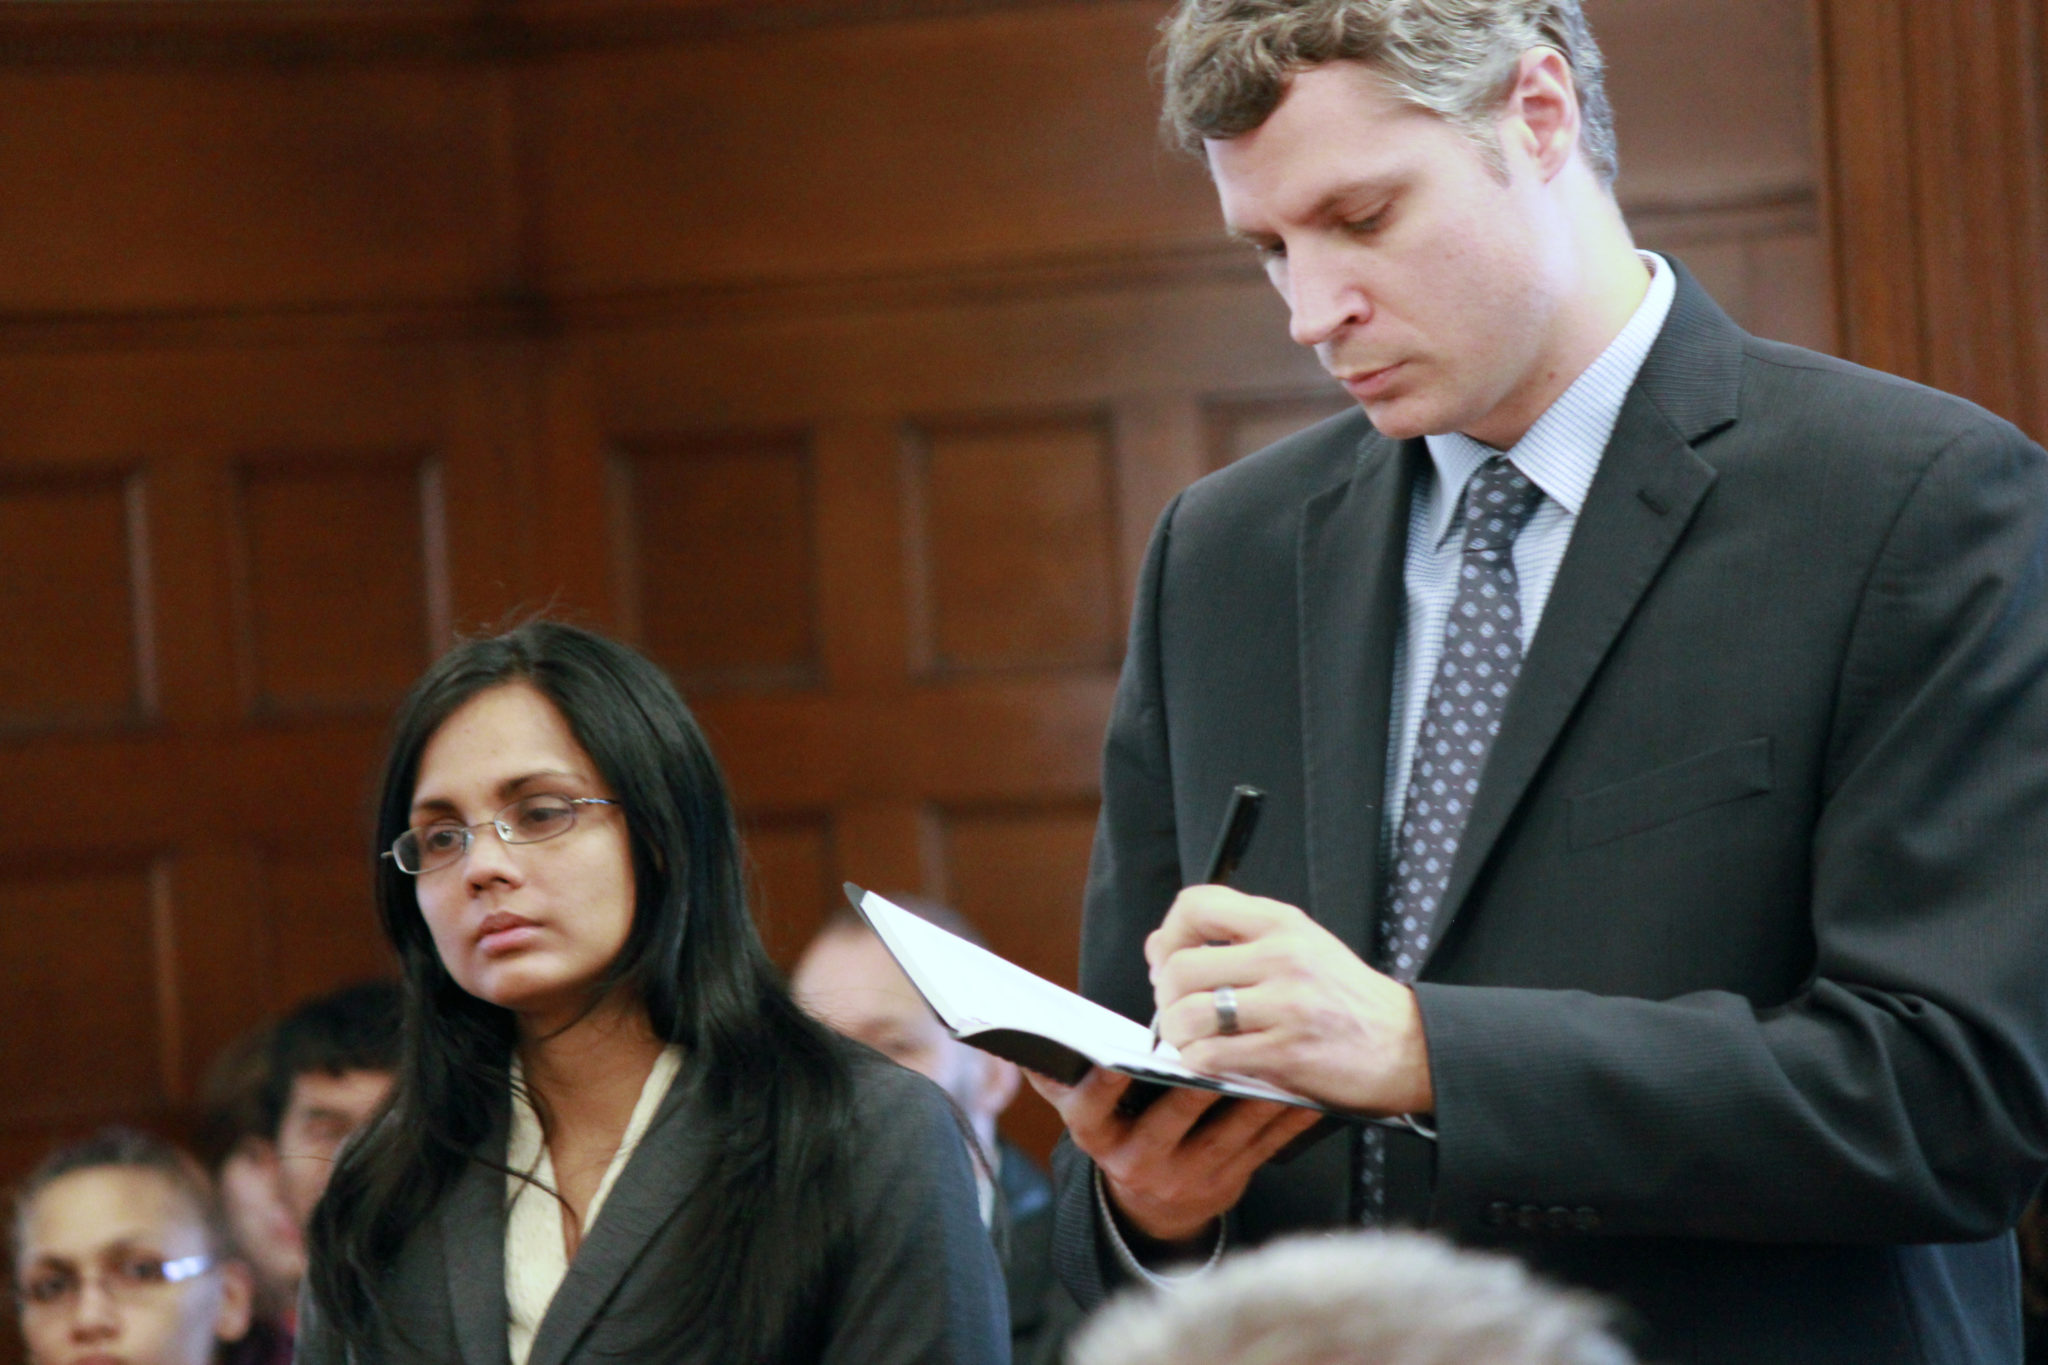 Annie Dookhan and attorney